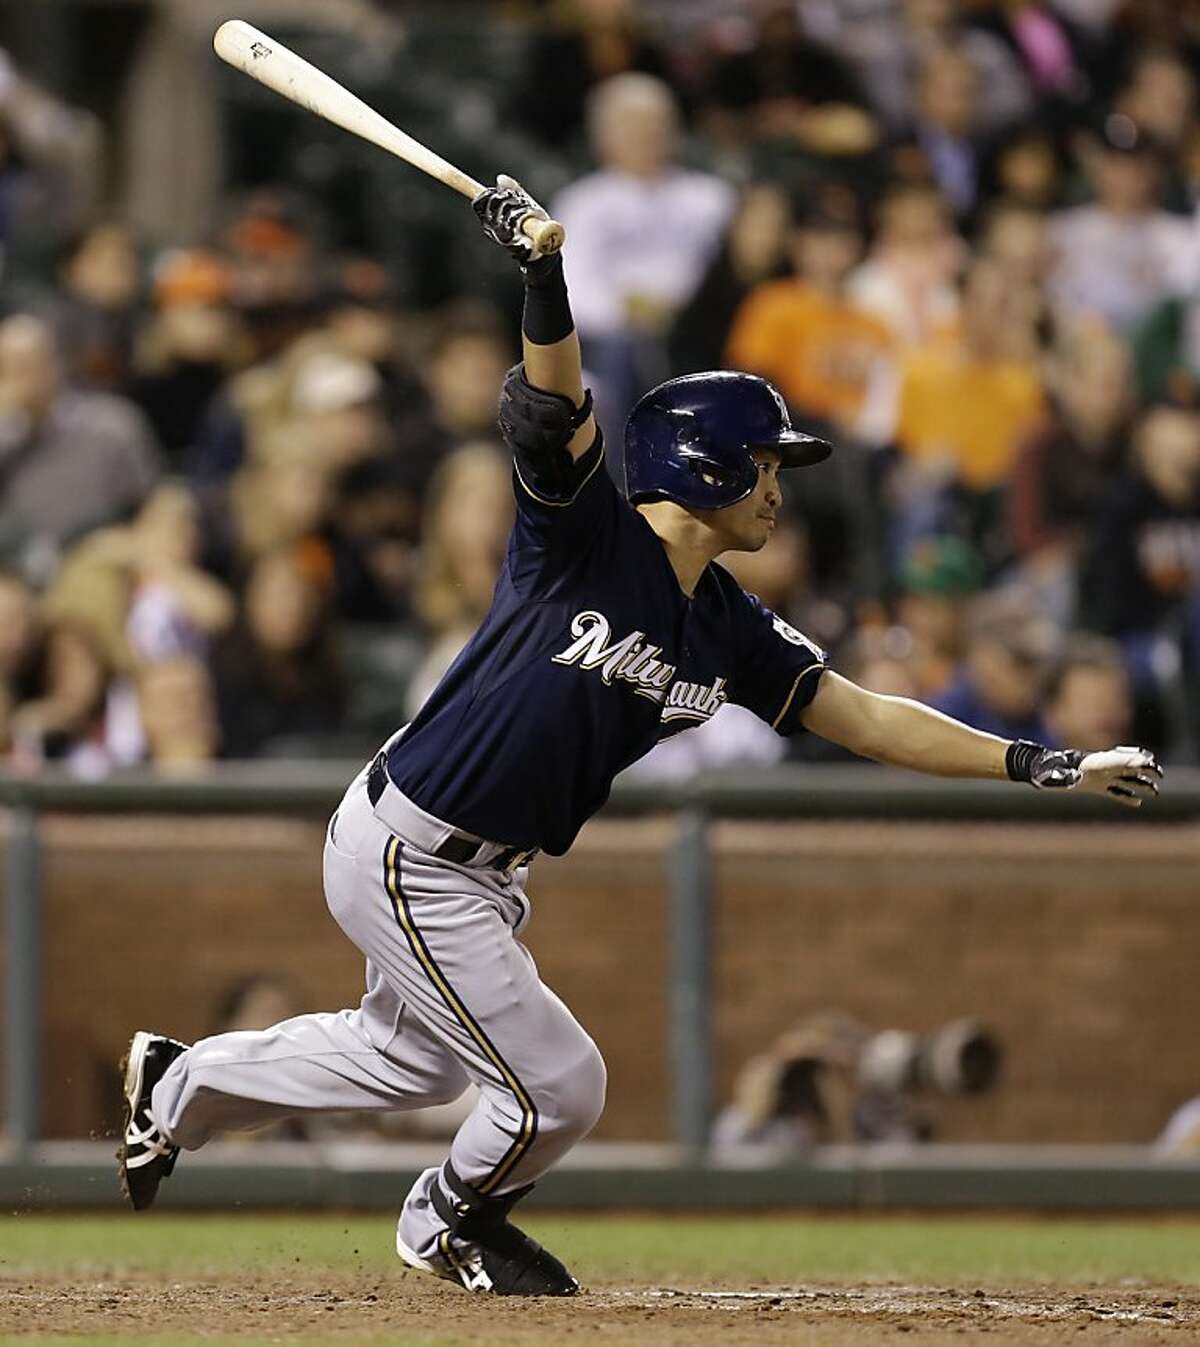 Milwaukee Brewers' Norichika Aoki, of Japan, swings for a two run single off San Francisco Giants' Santiago Casilla in the eighth inning of a baseball game Wednesday, Aug. 7, 2013, in San Francisco. (AP Photo/Ben Margot)